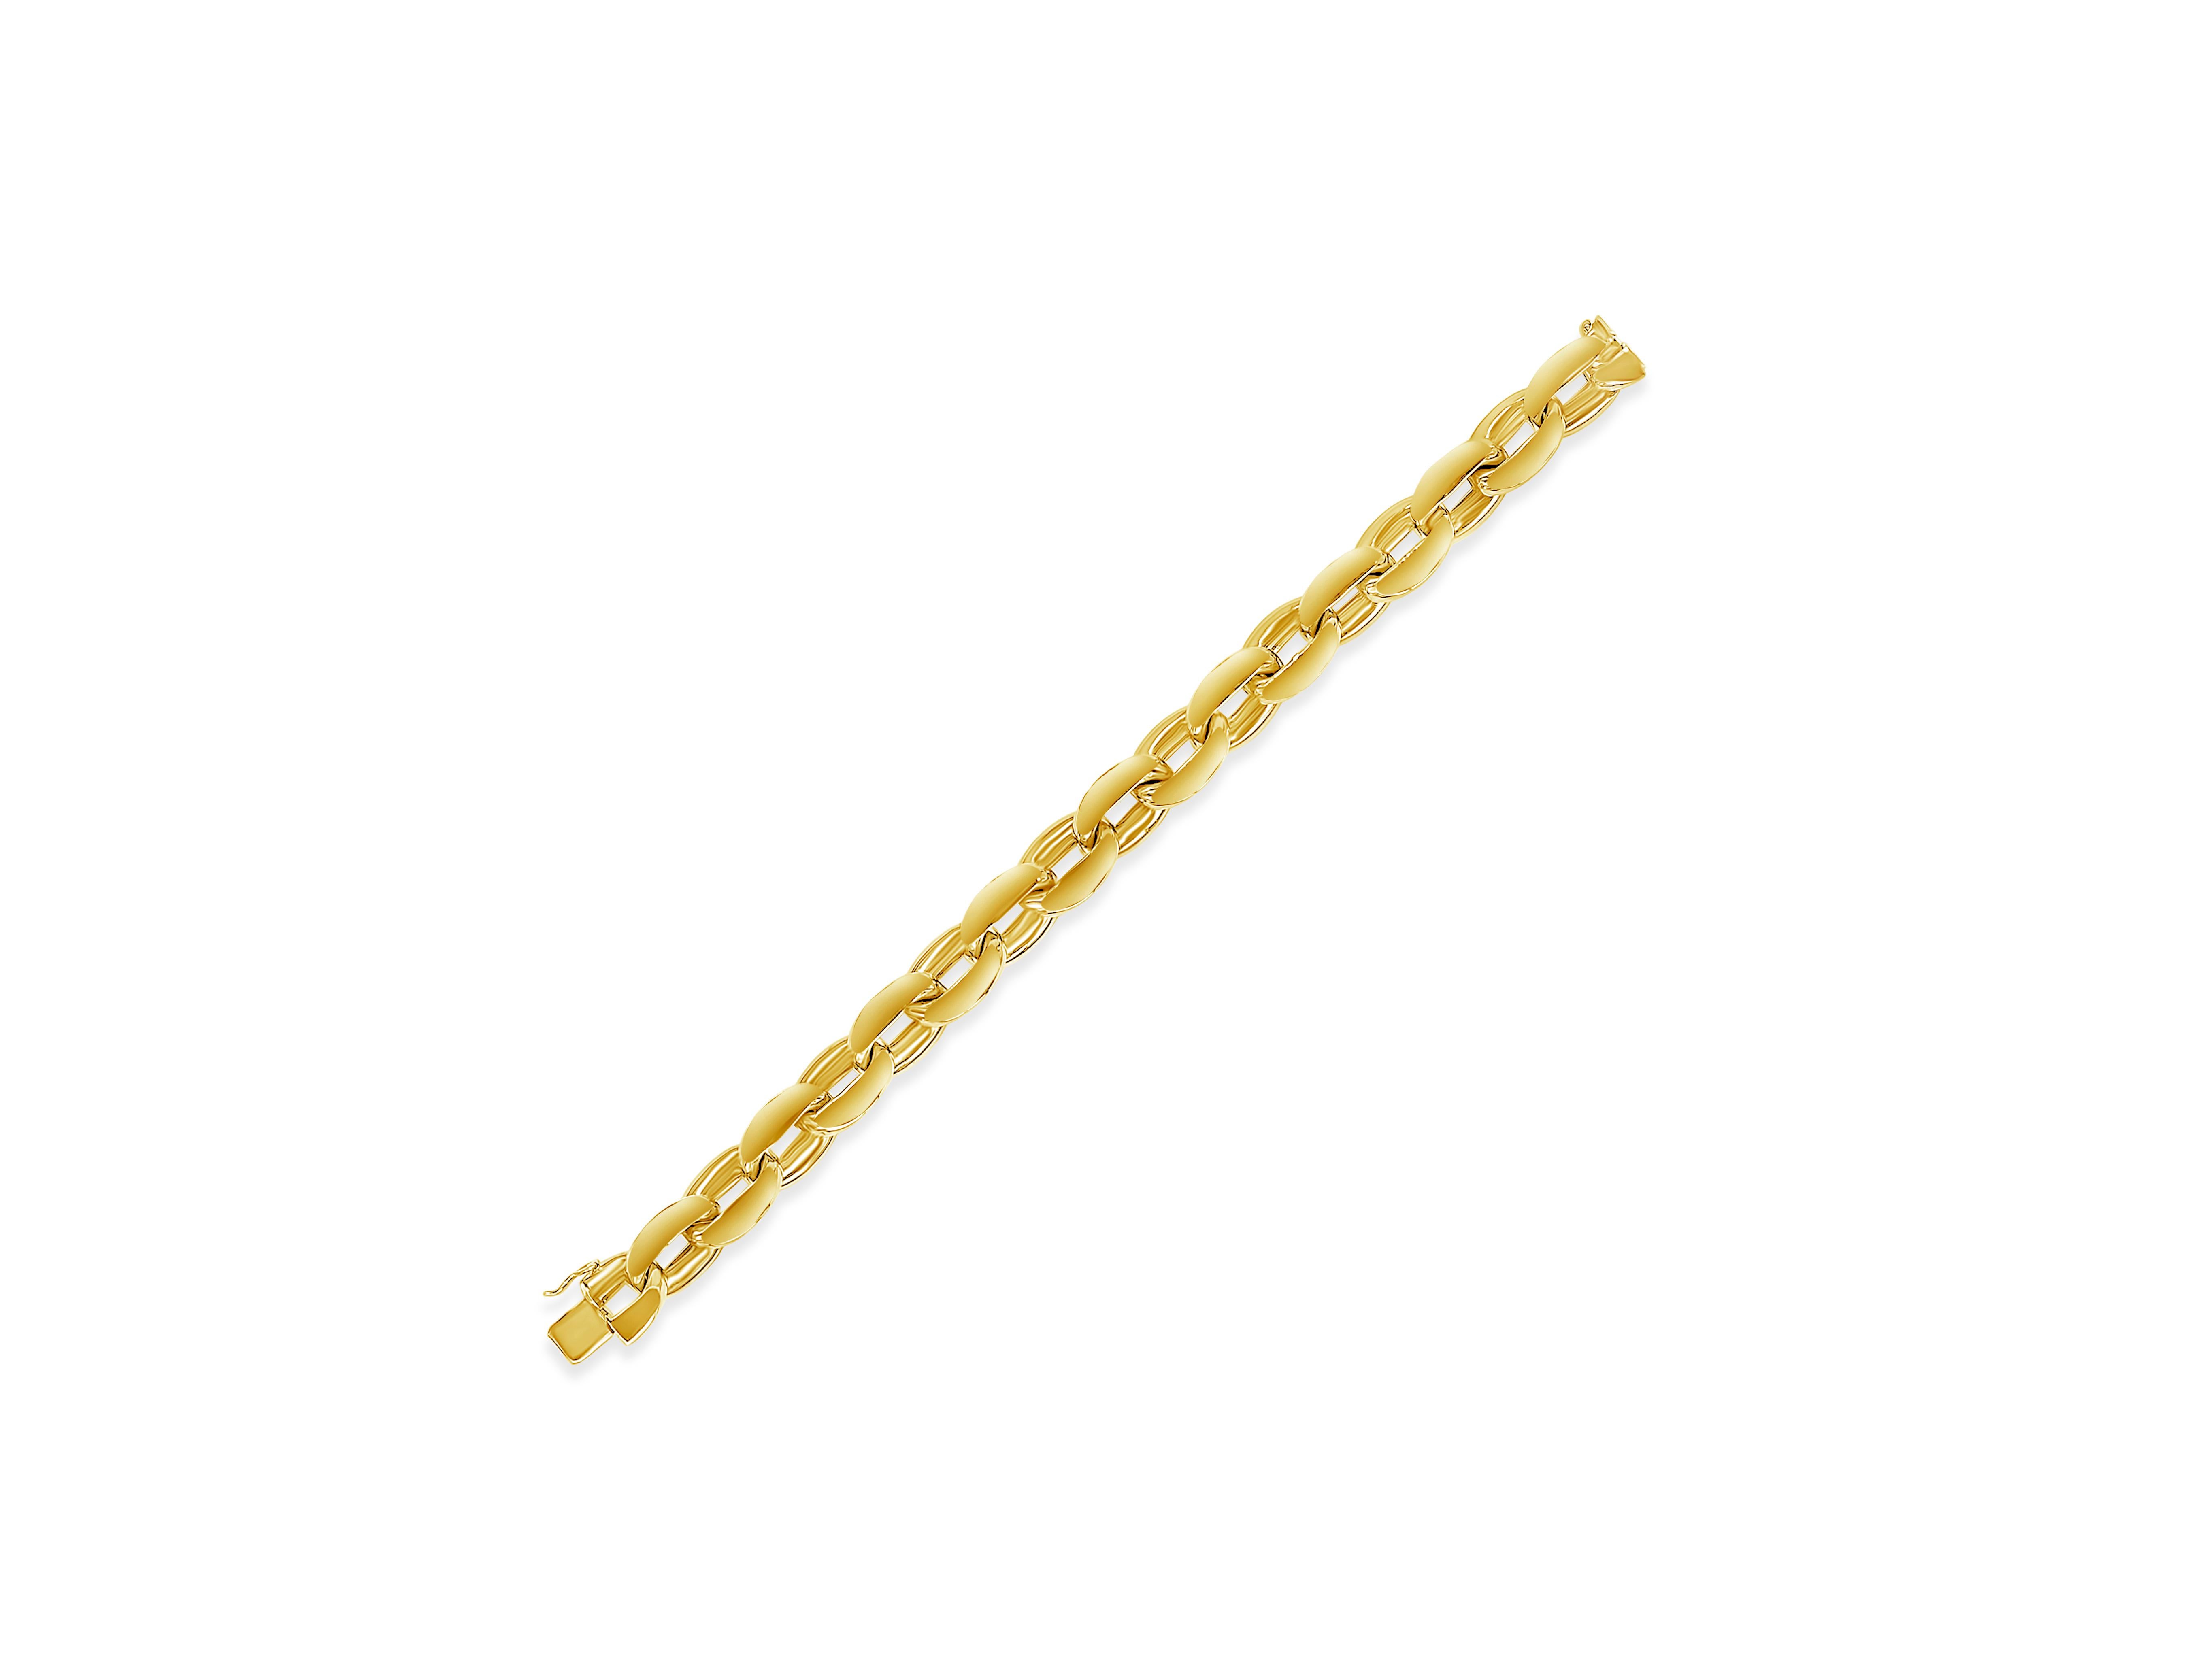 A classic and distinct bracelet showcasing large oval links made in solid 18 karats yellow gold. Bracelet weighs 35.87 grams. Approximately 8.5 inches in Length.